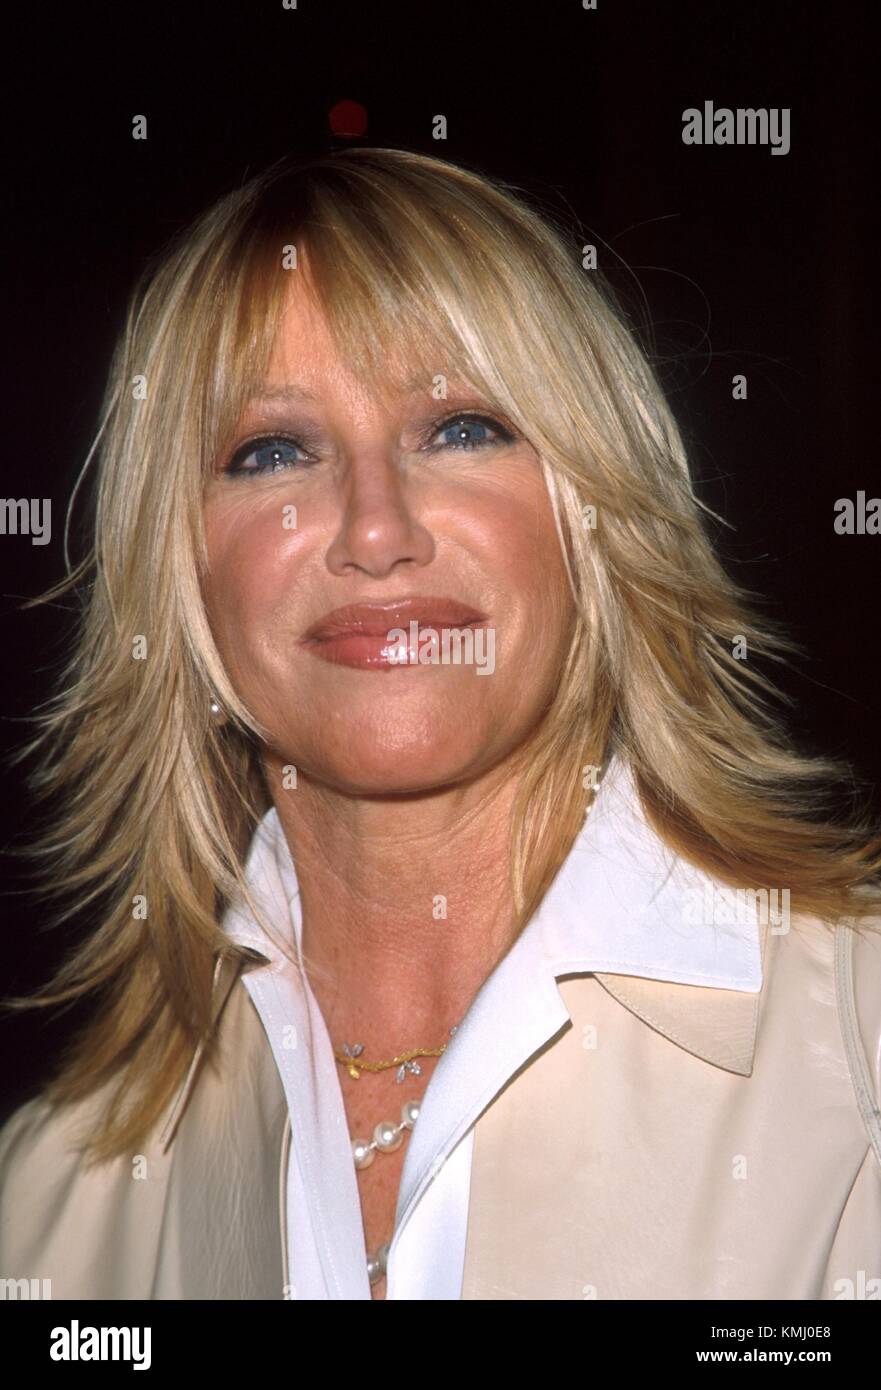 Suzanne Somers Cameltoe